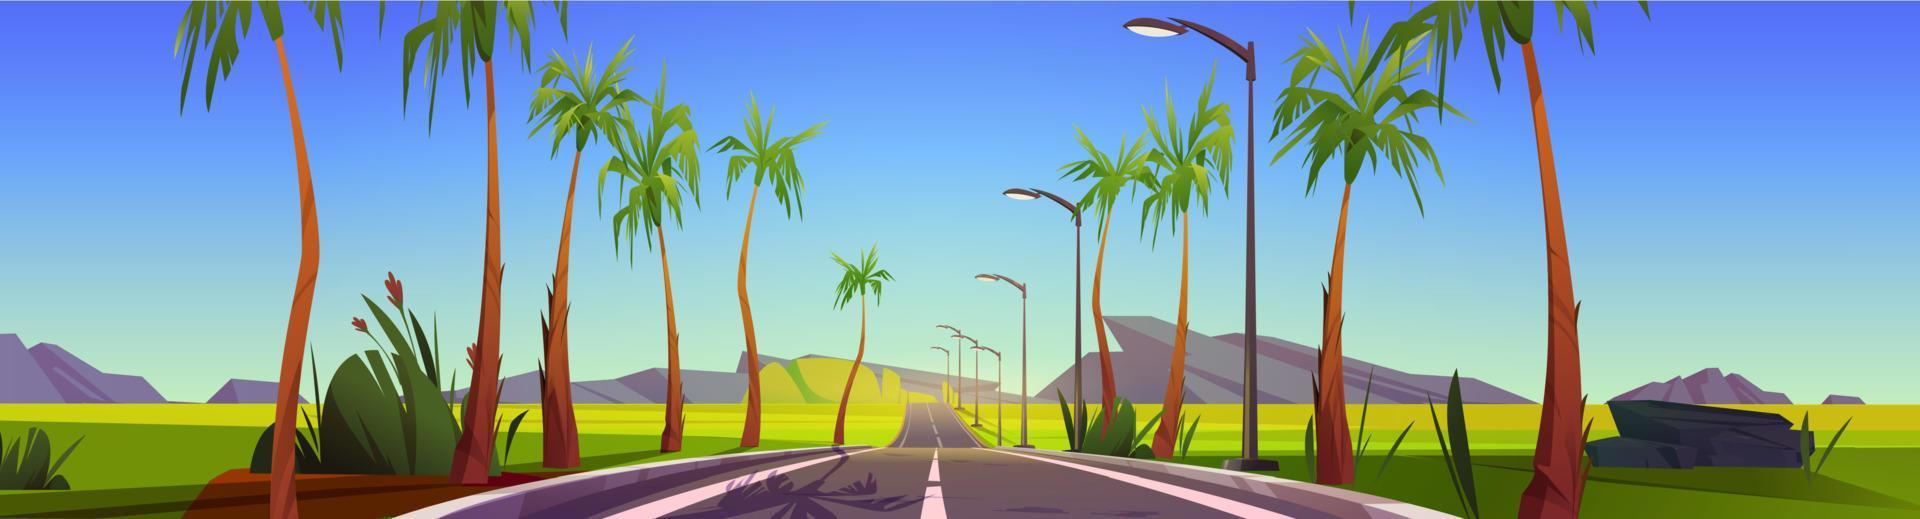 Tropical landscape with car road, palm trees vector